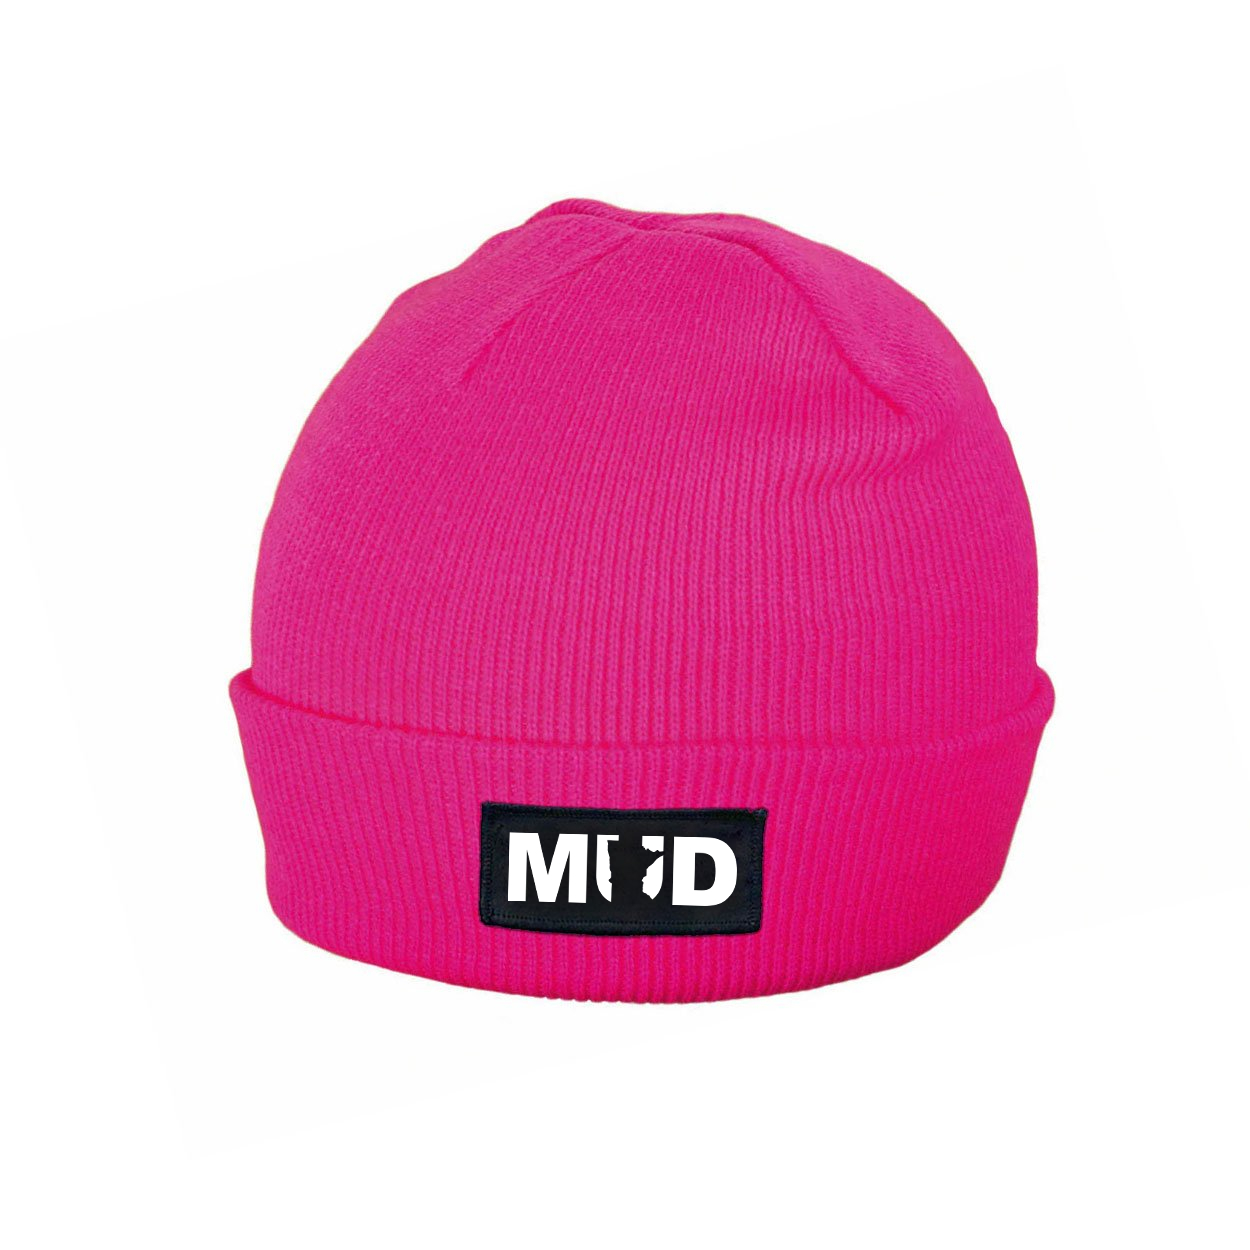 Mud Minnesota Night Out Woven Patch Roll Up Skully Beanie Heather Fuchsia (White Logo)